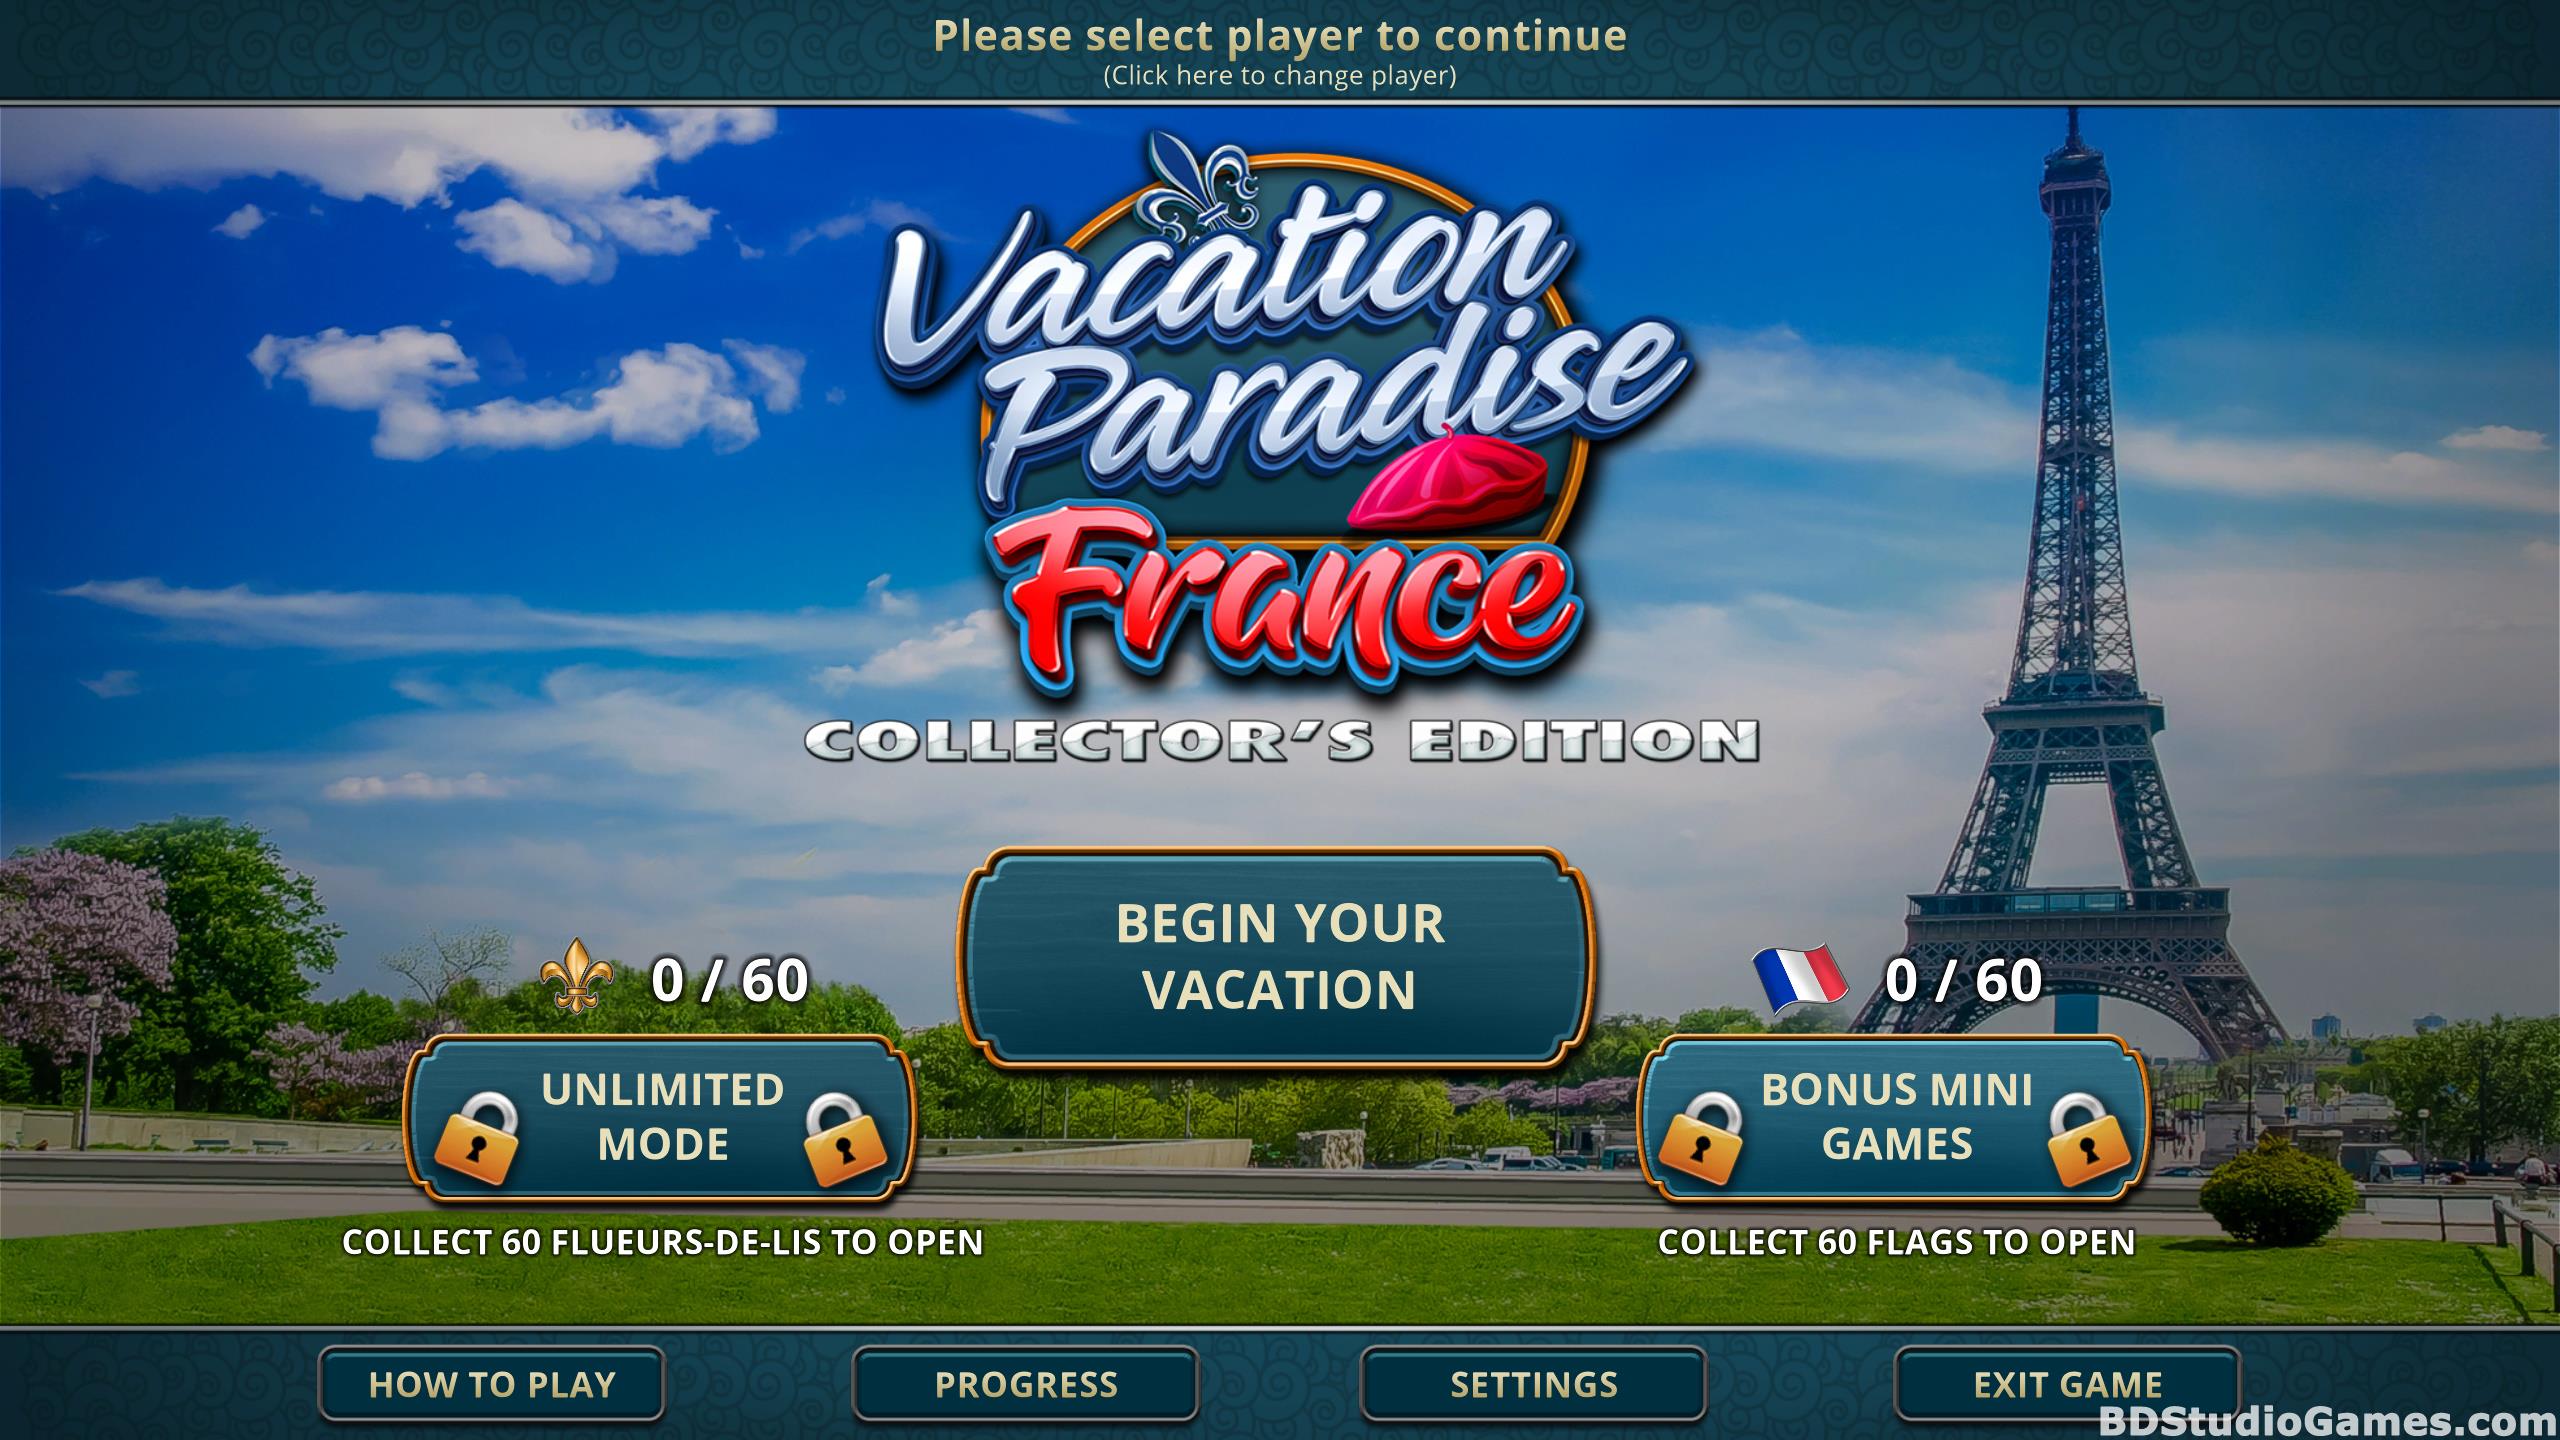 Vacation Paradise: France Collector's Edition Free Download Screenshots 01